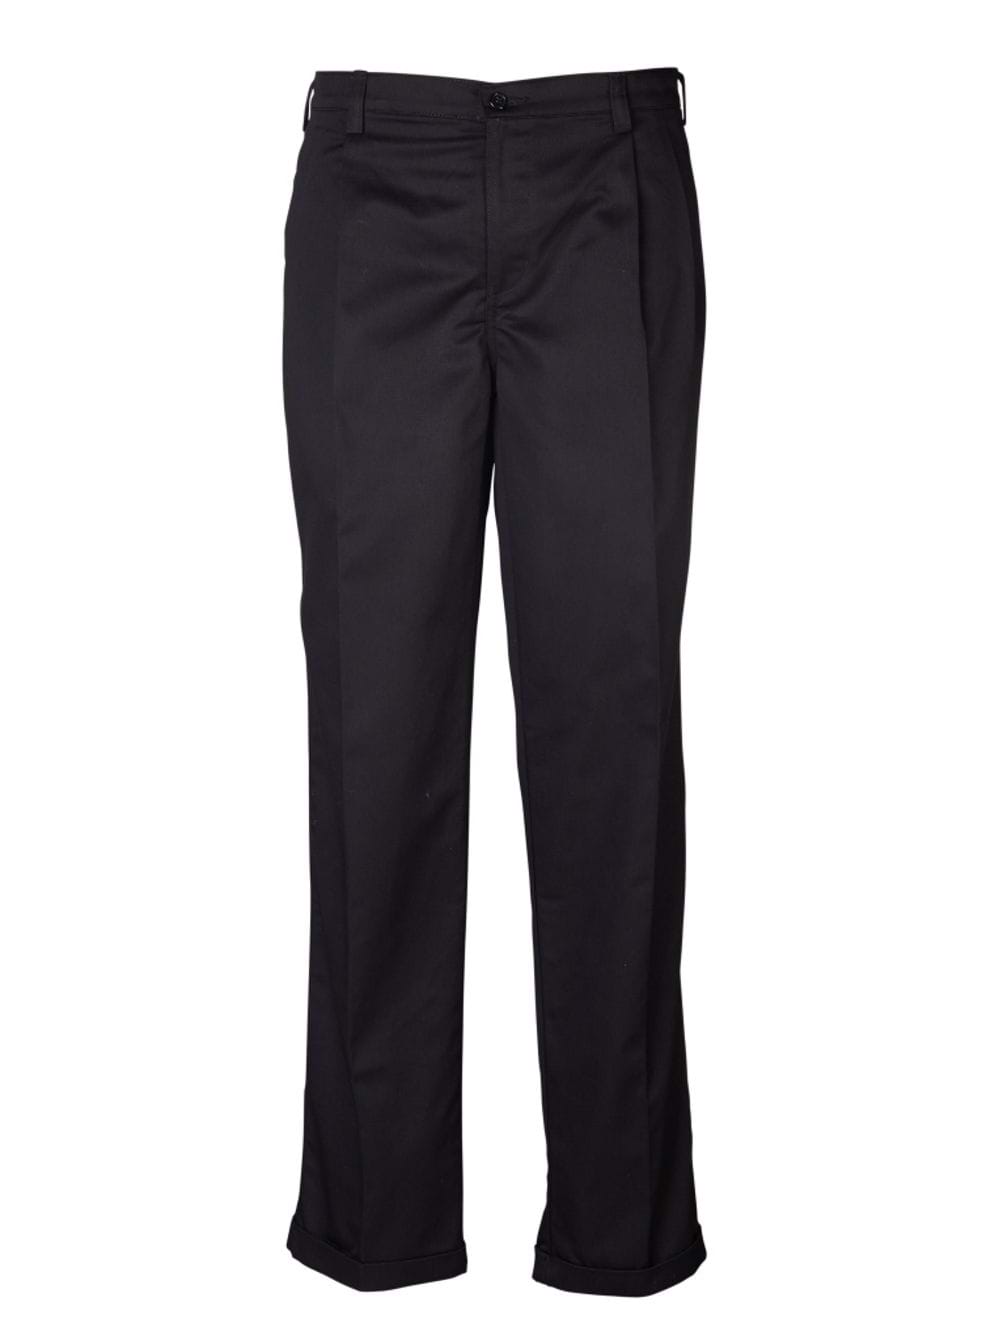 Eastwood Chino with Turnups - Black / 42